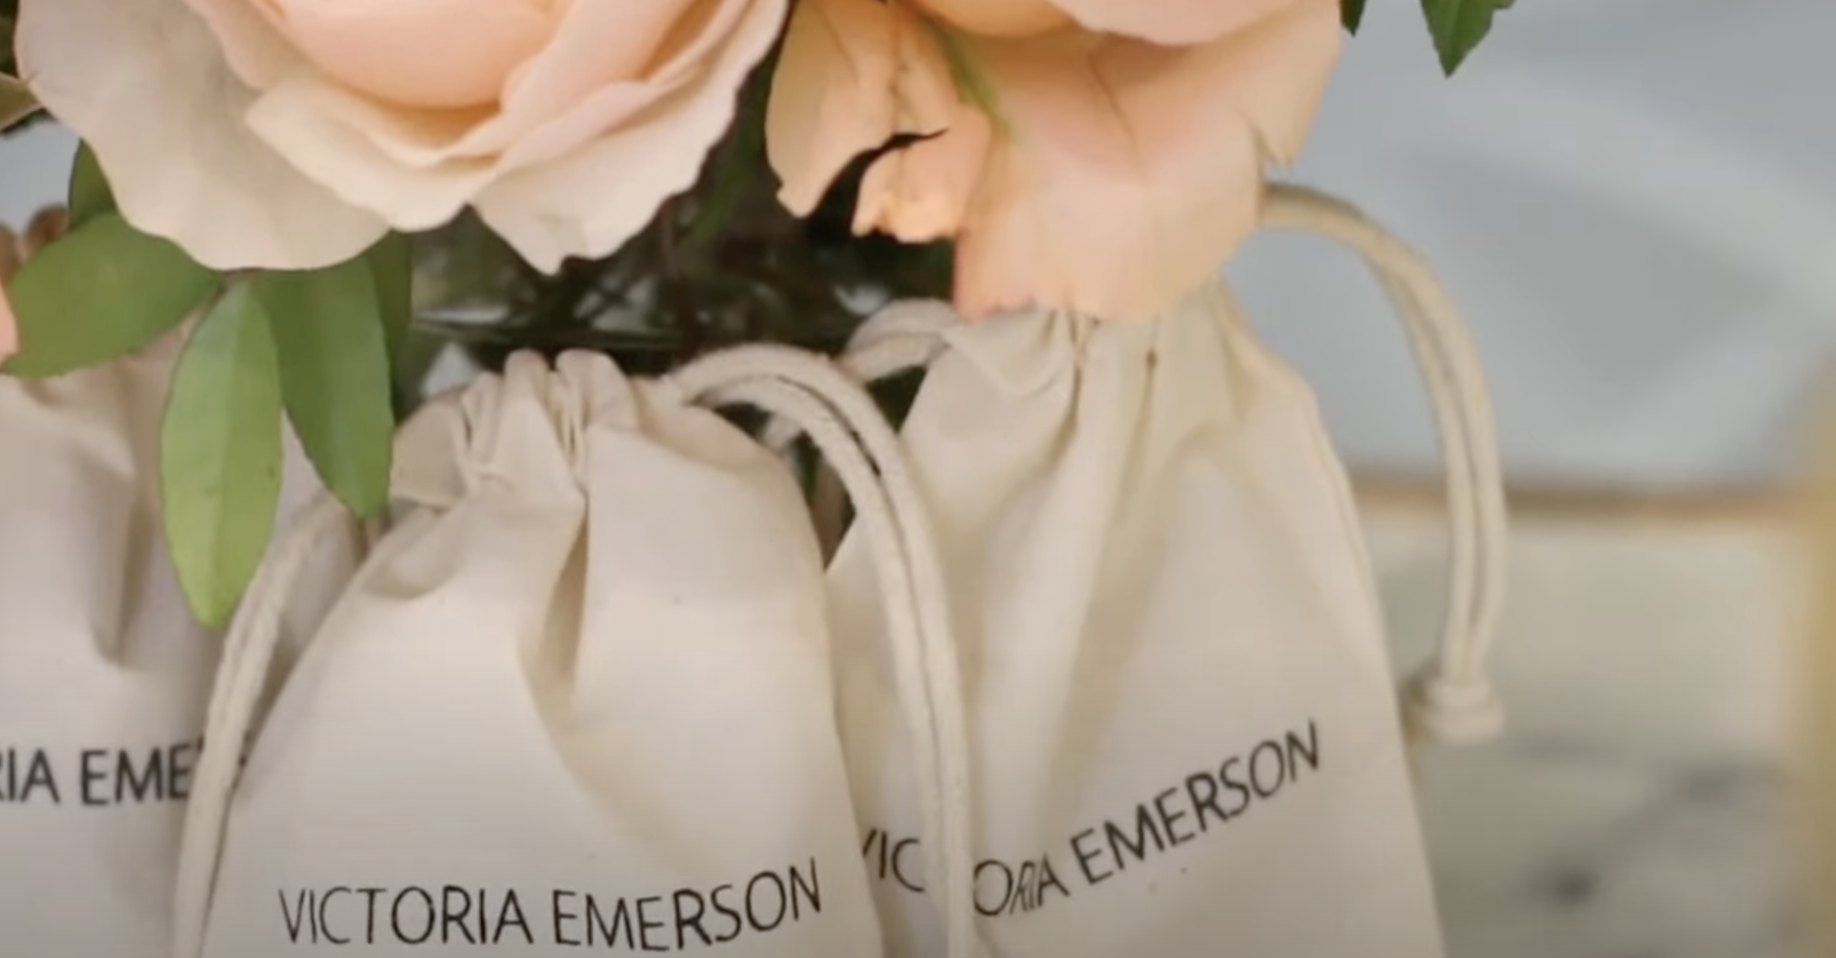 emerson victory bags